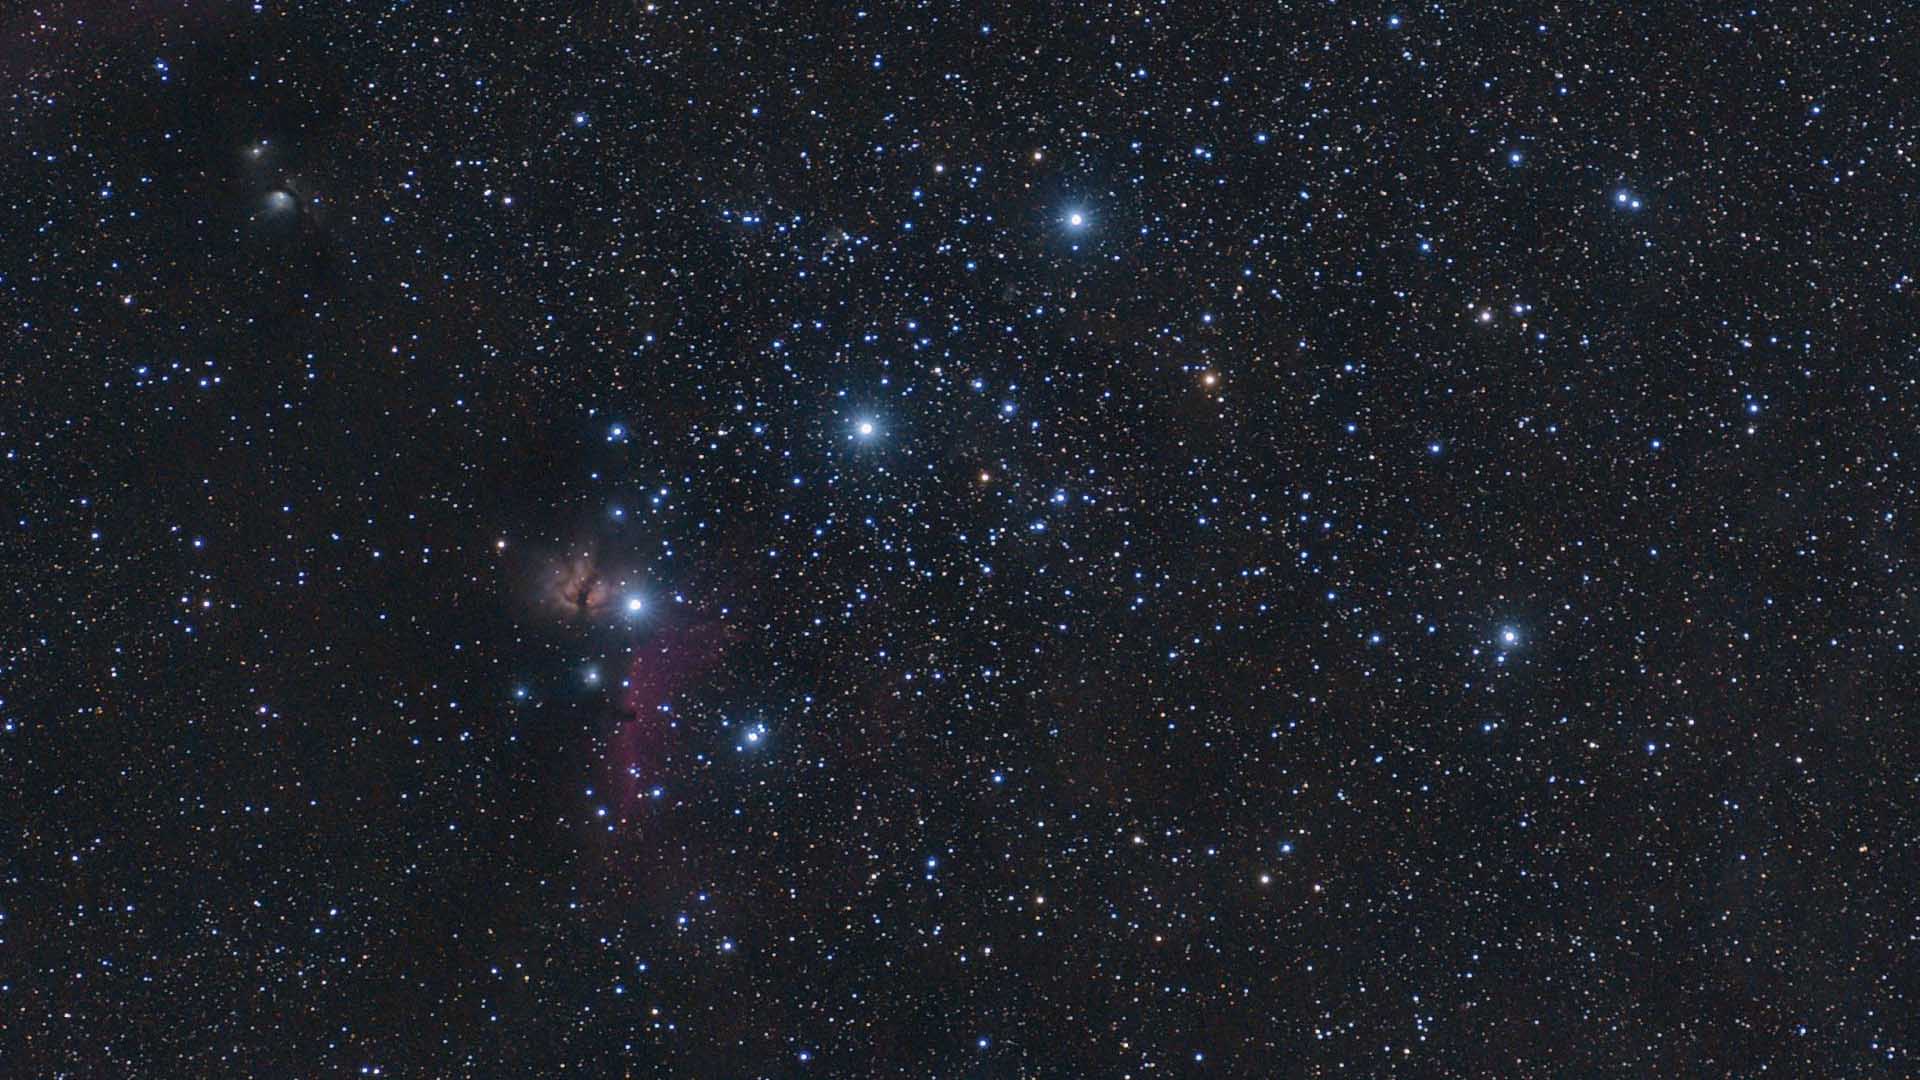 Orion's belt and sword reveal a series of highlights in the night sky. Marcus Degenkolbe